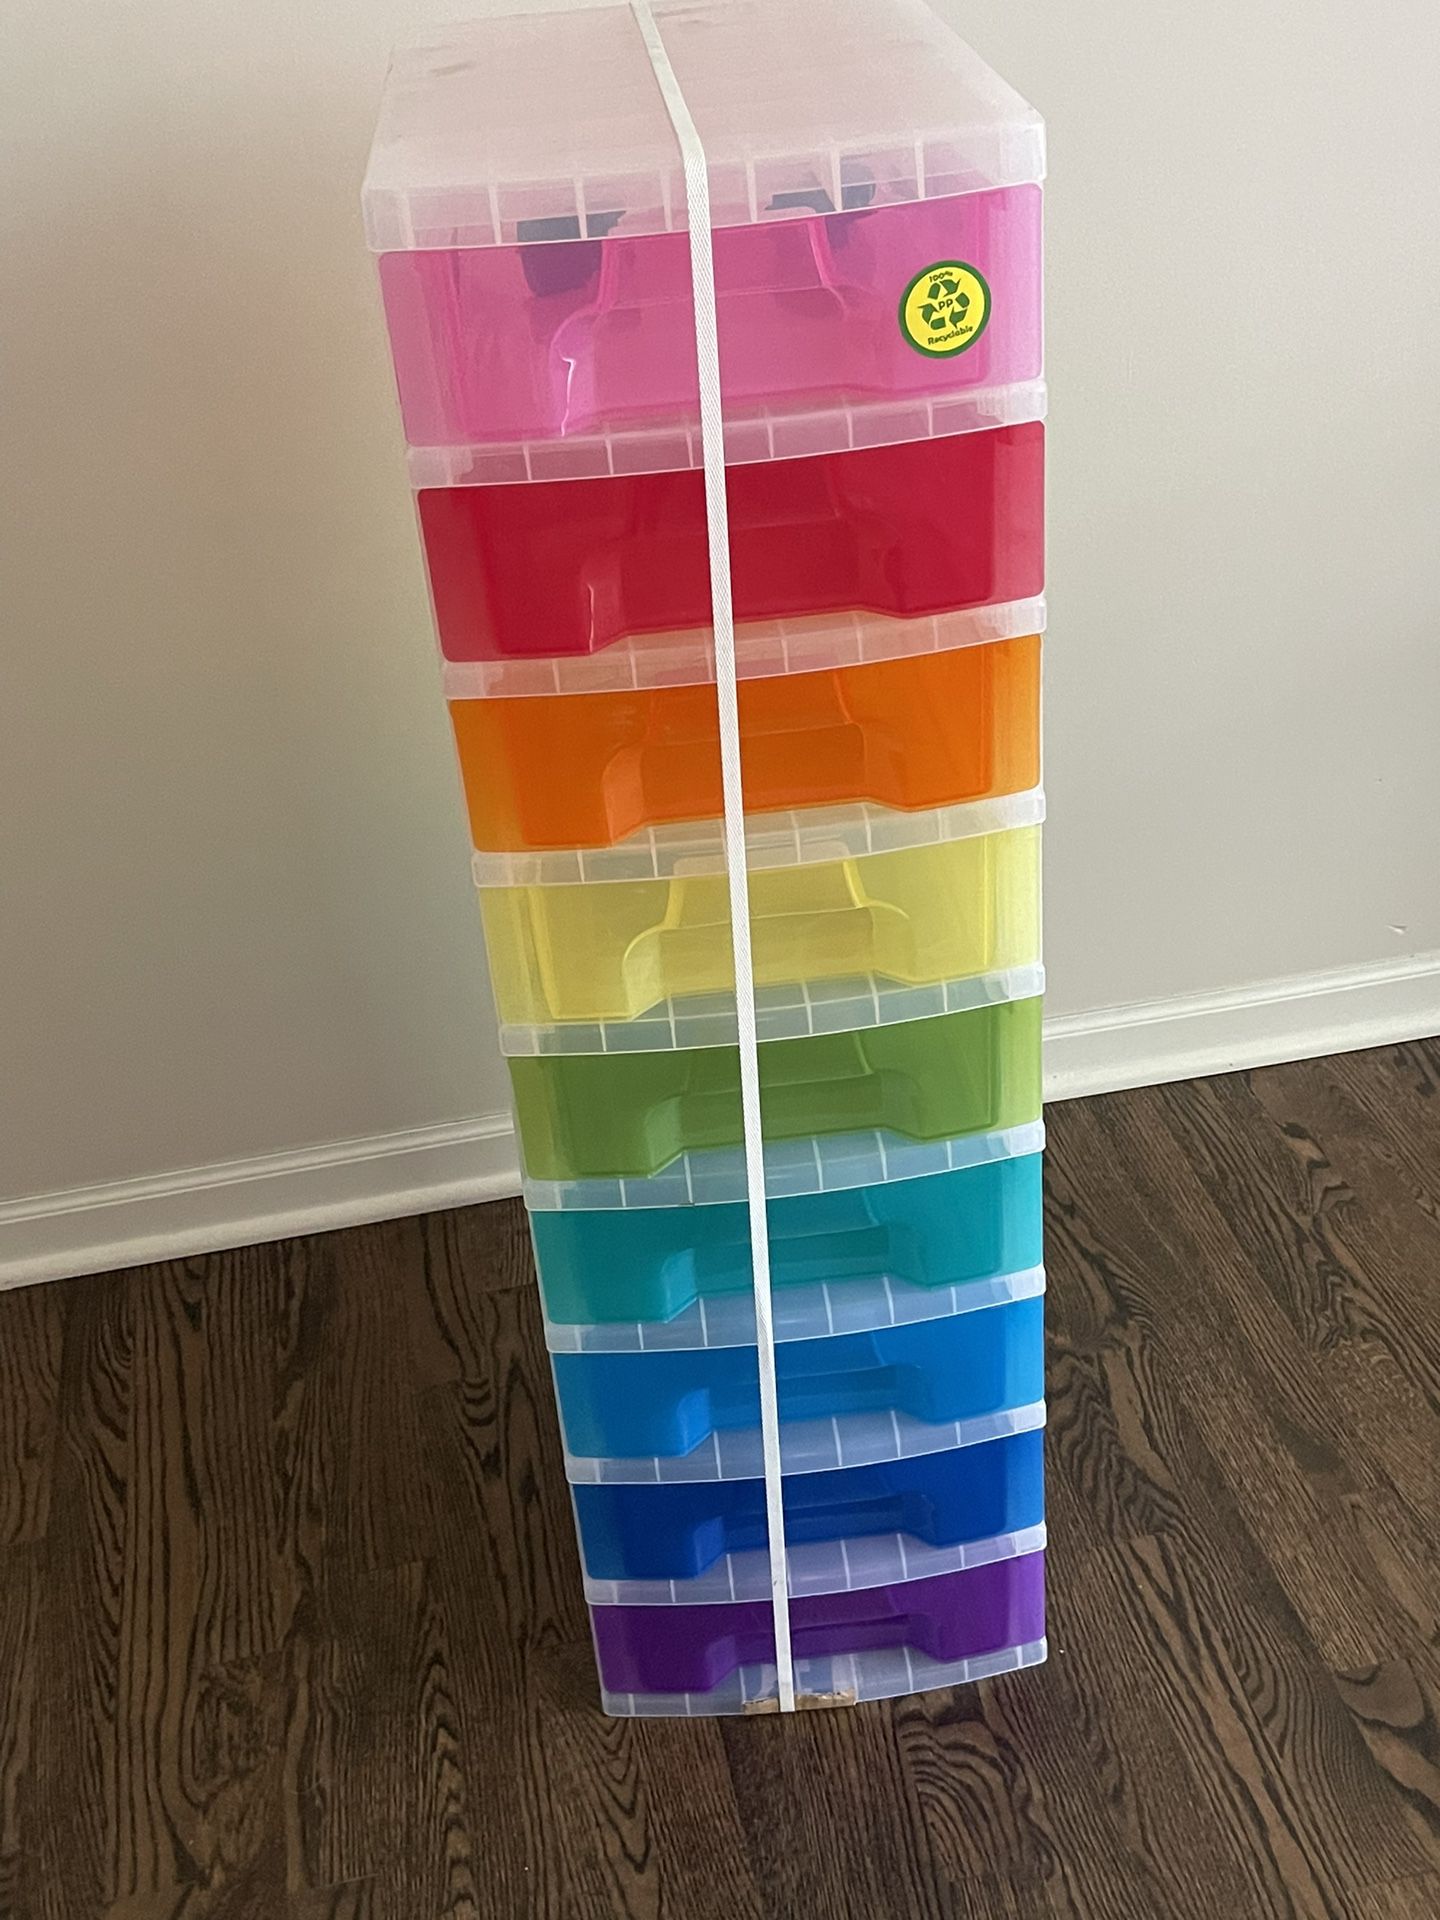 Storage Tower 8x7 Litre Clear Frame with 9 Rainbow Drawers